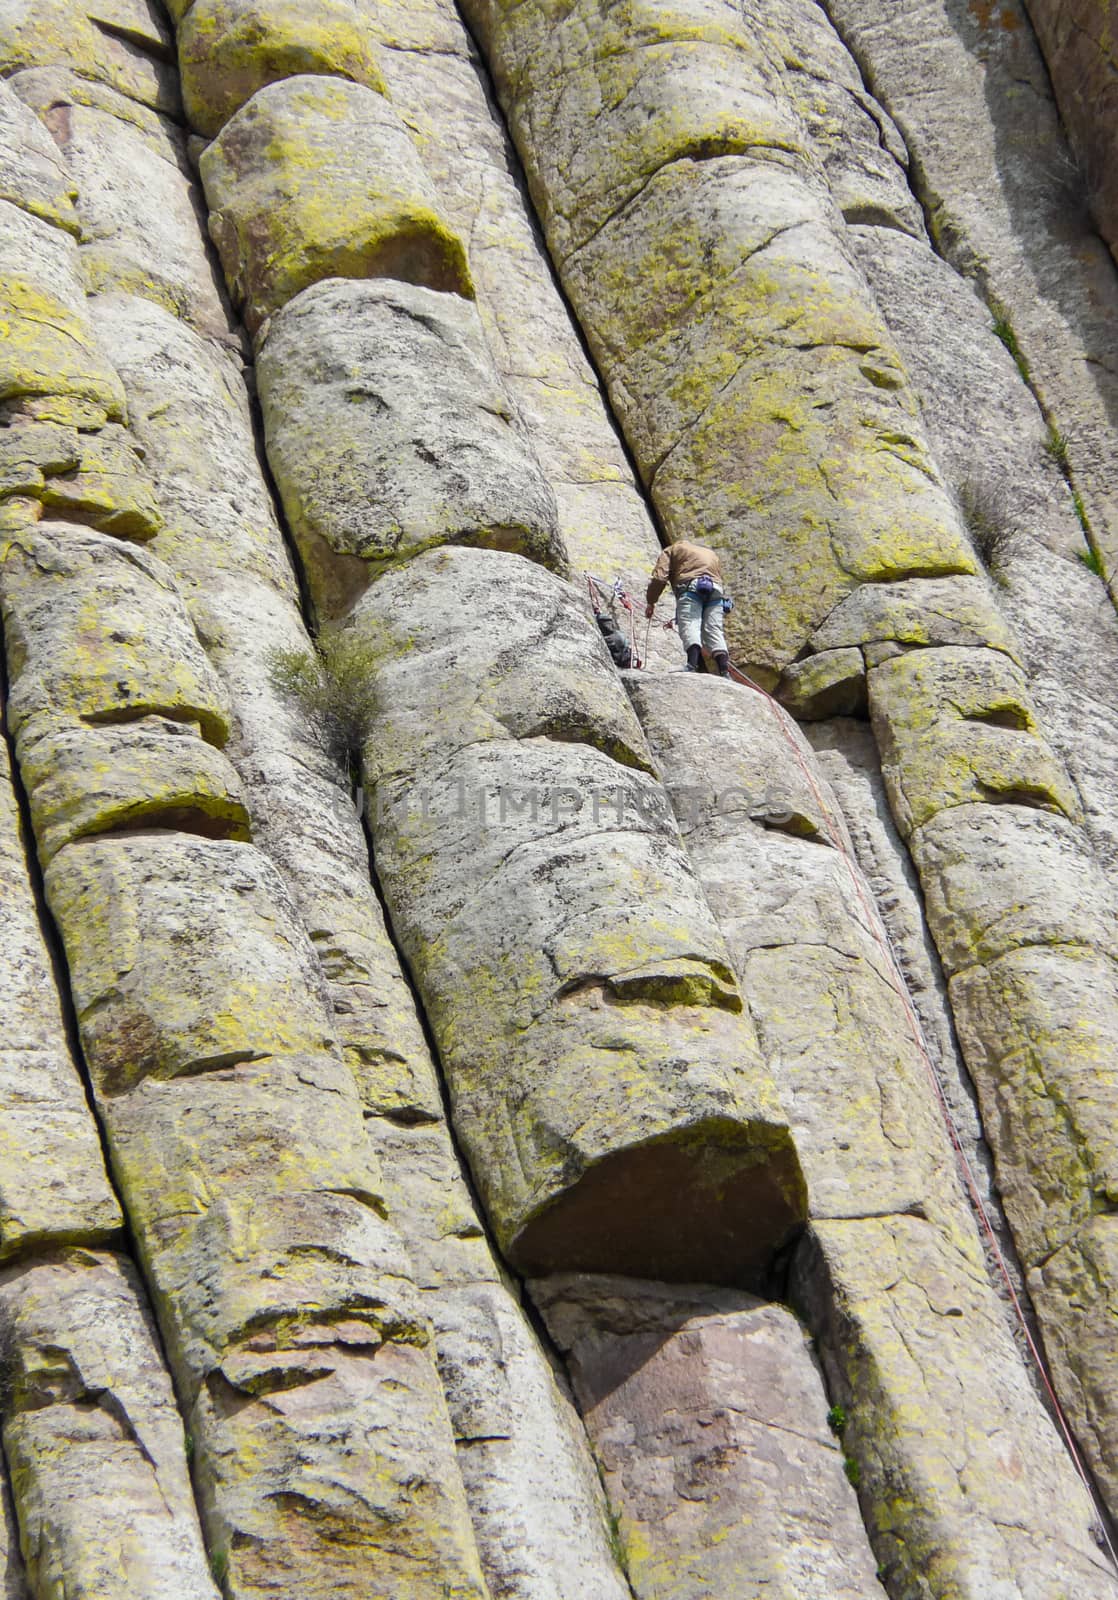 Devils Tower, Wyoming, USA - May 11, 2008: Man climbing on the wall of famous mountain Devils Tower in the Black Hills (Wyoming).